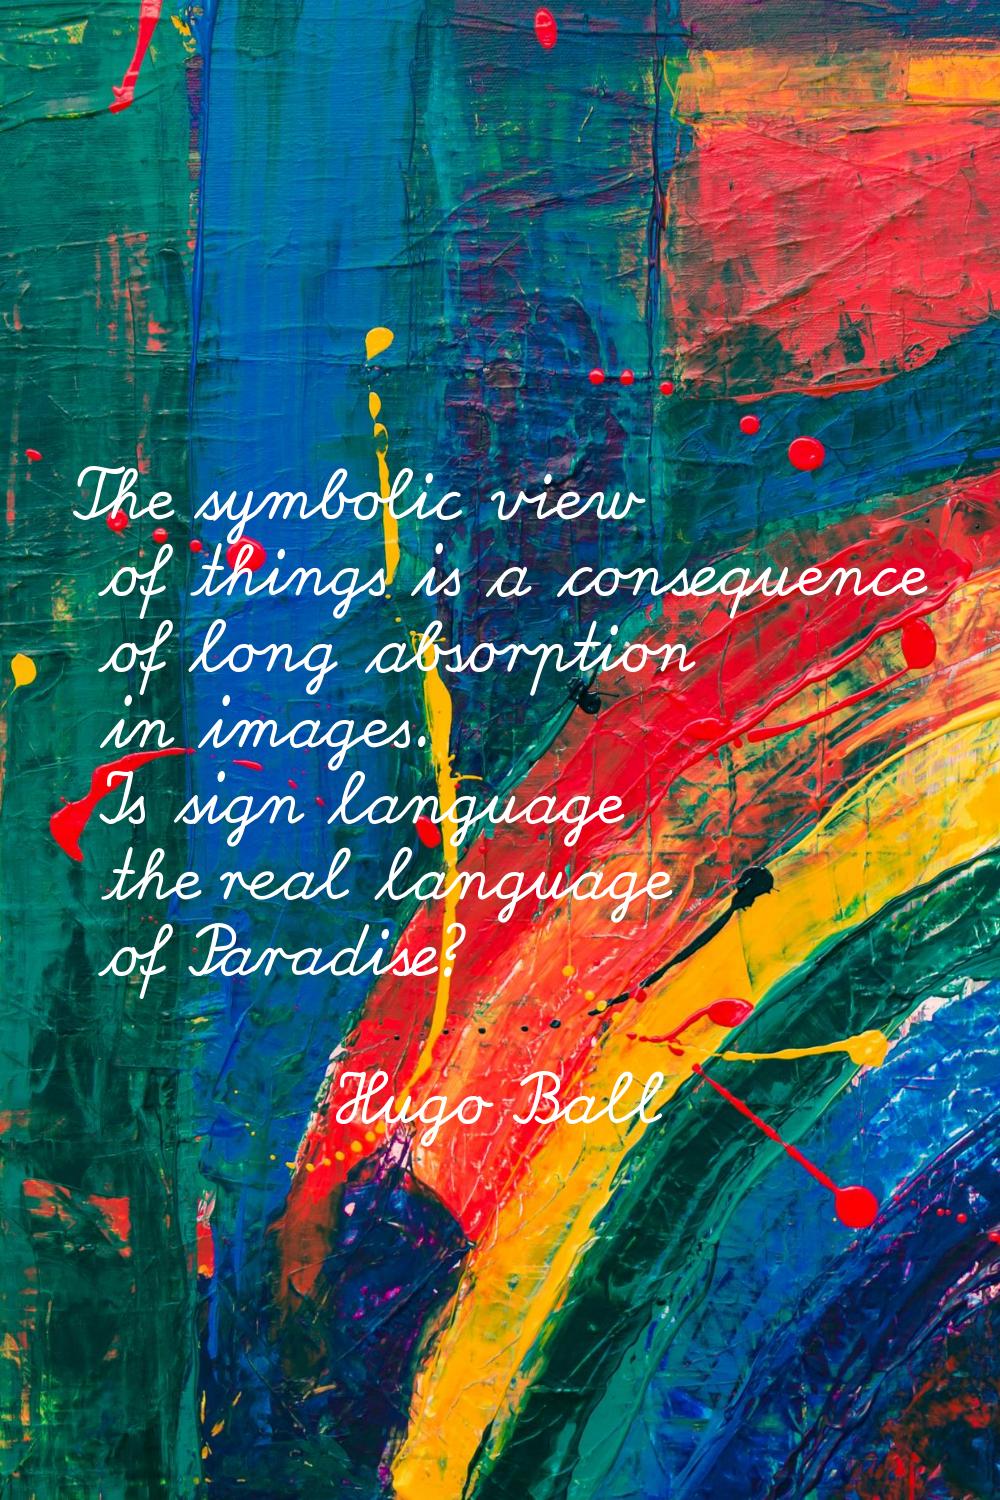 The symbolic view of things is a consequence of long absorption in images. Is sign language the rea